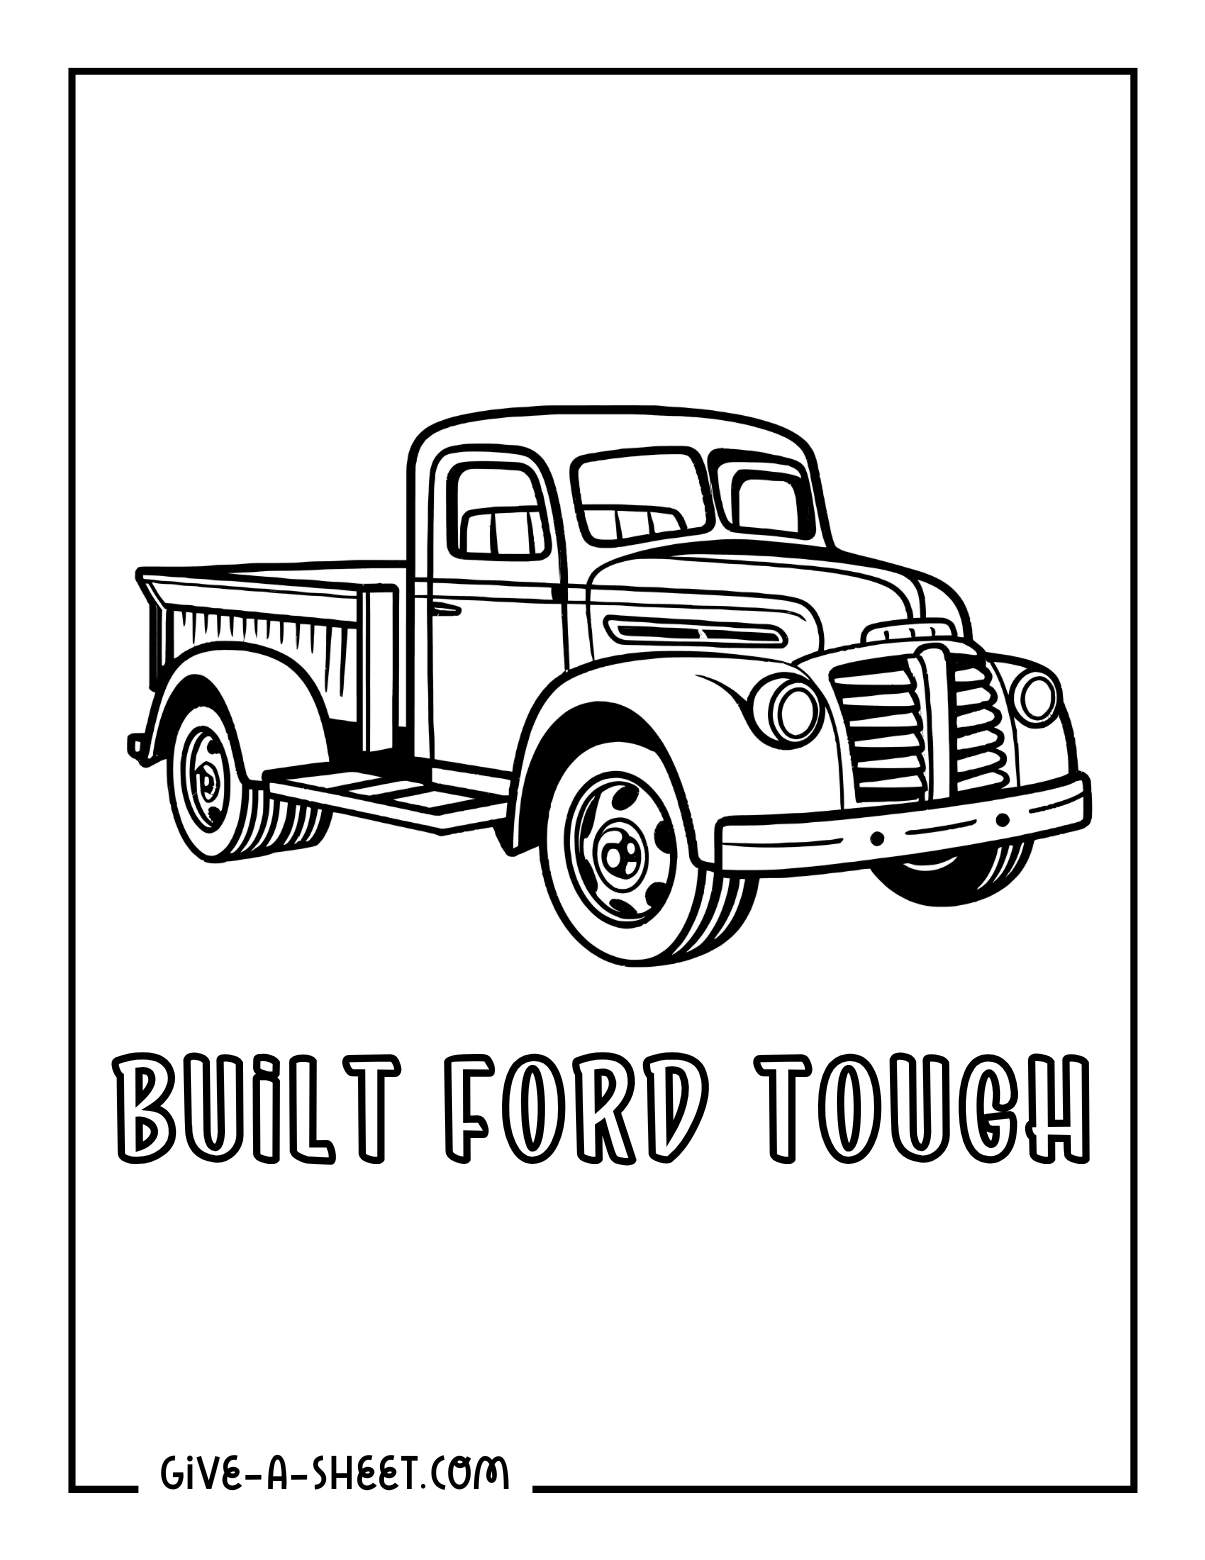 Vintage Ford pick up truck coloring page.